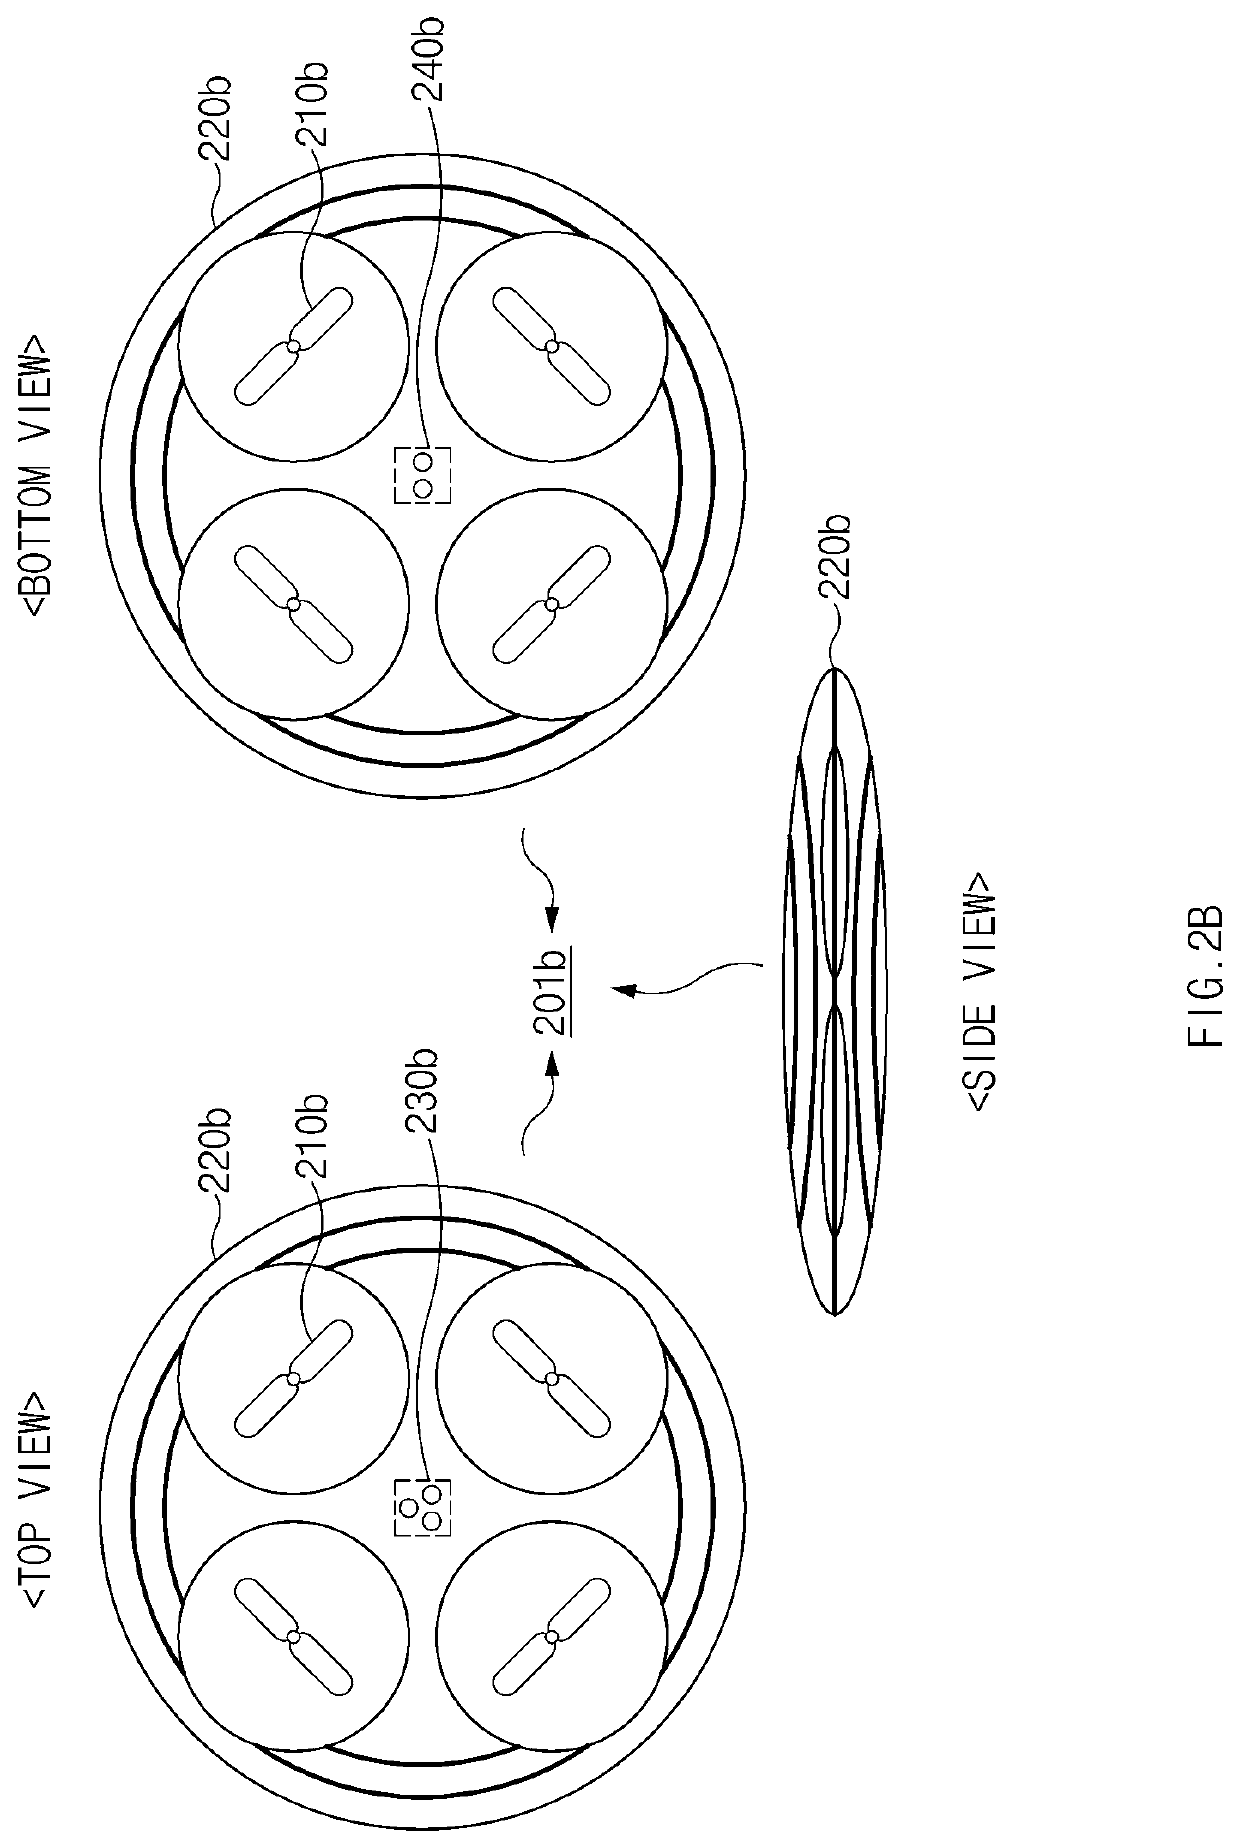 Unmanned aerial vehicle and method for controlling same